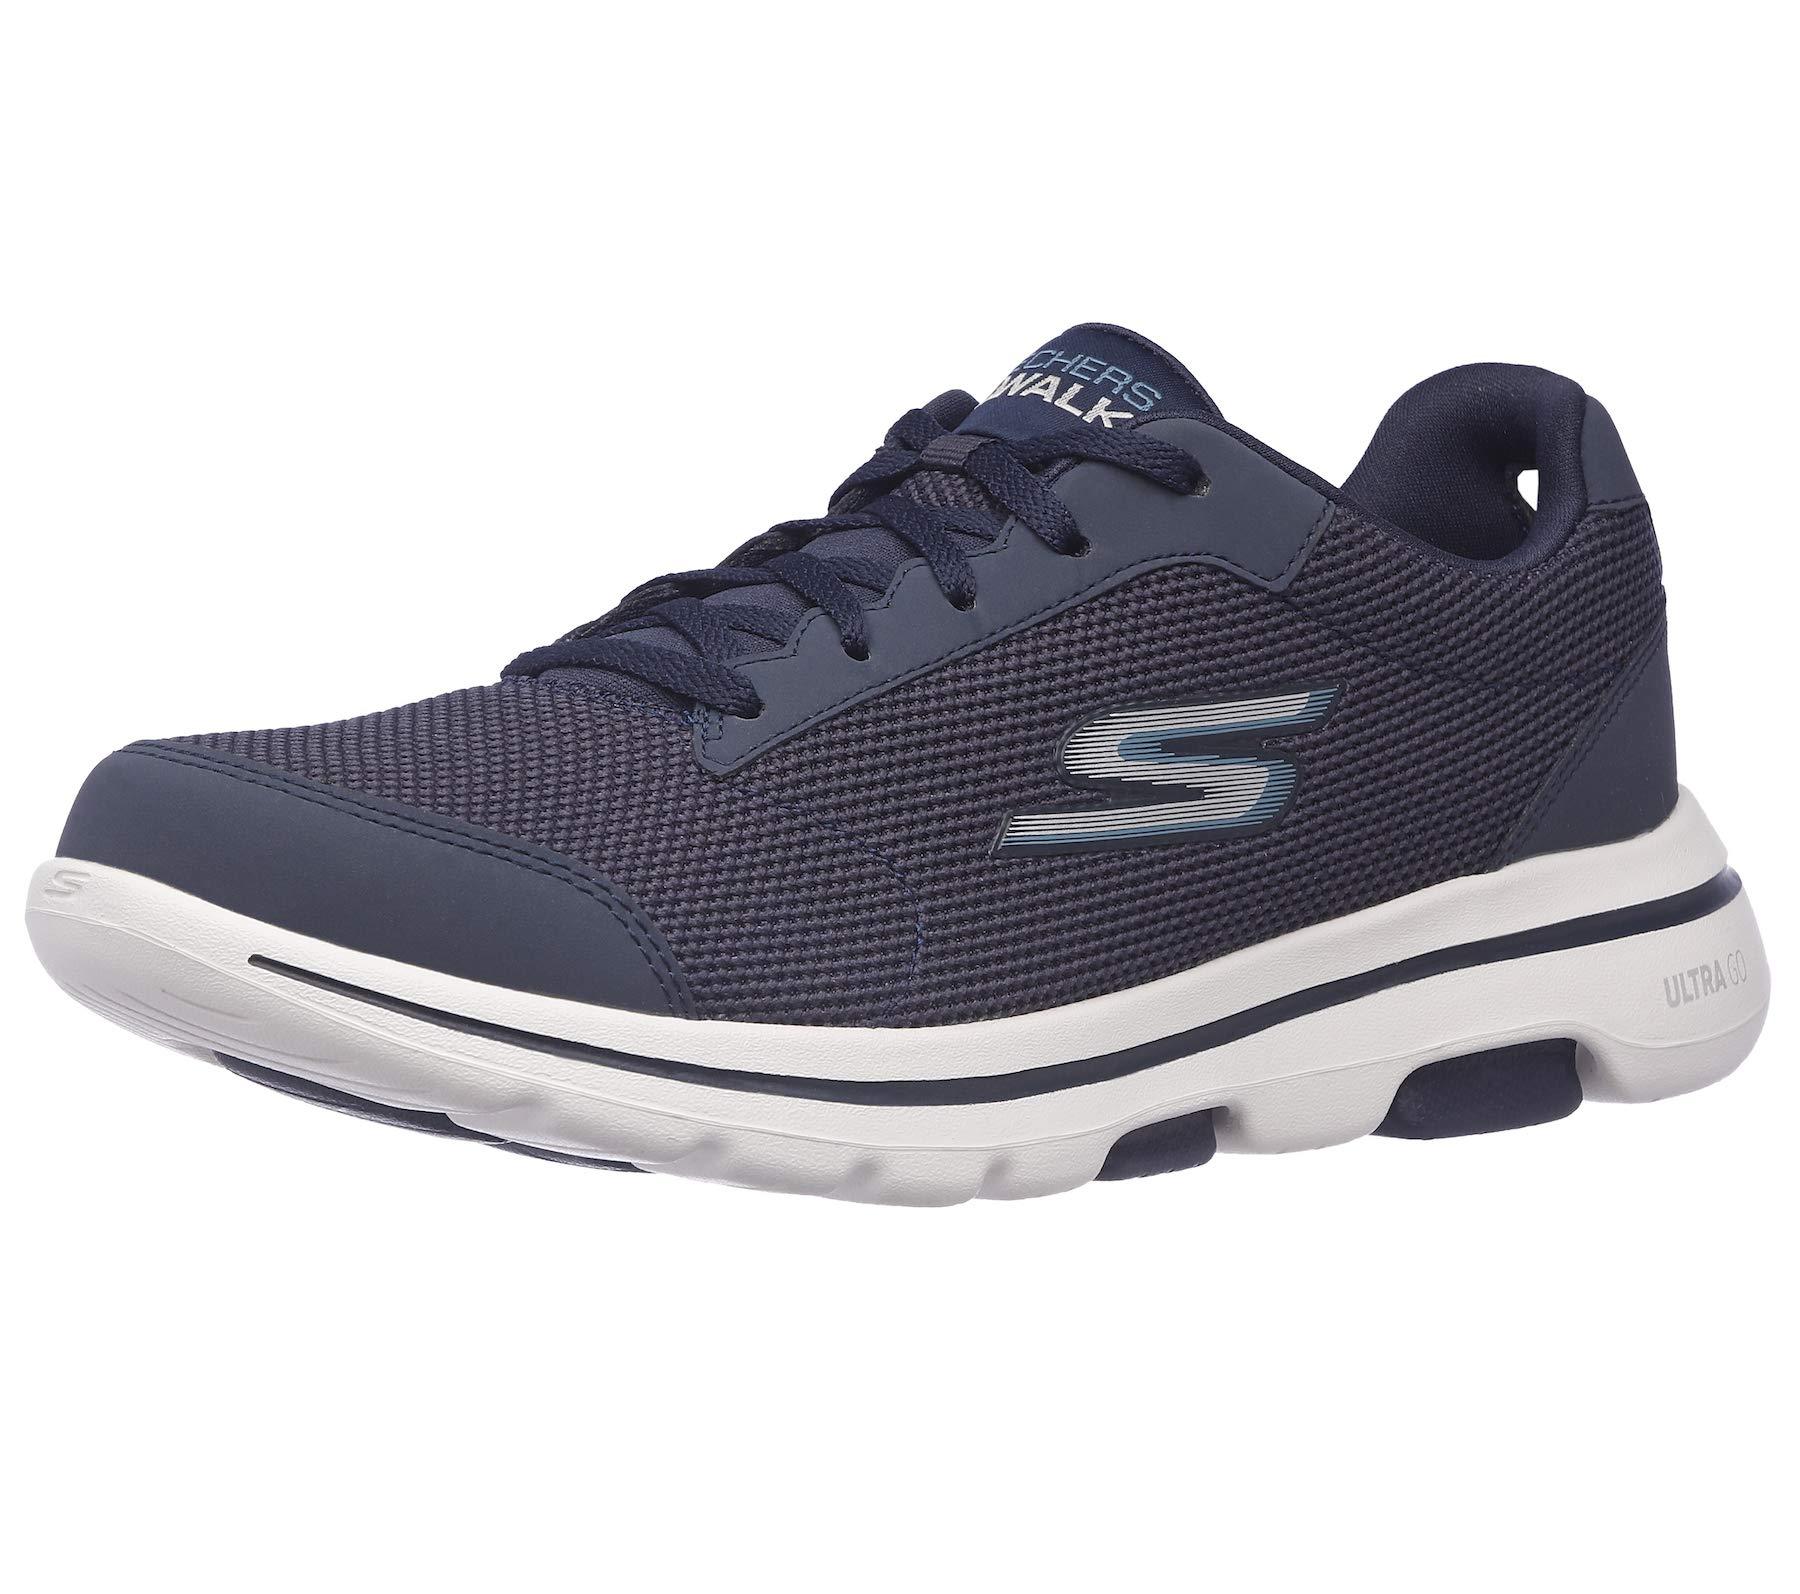 where to buy skechers go walk shoes